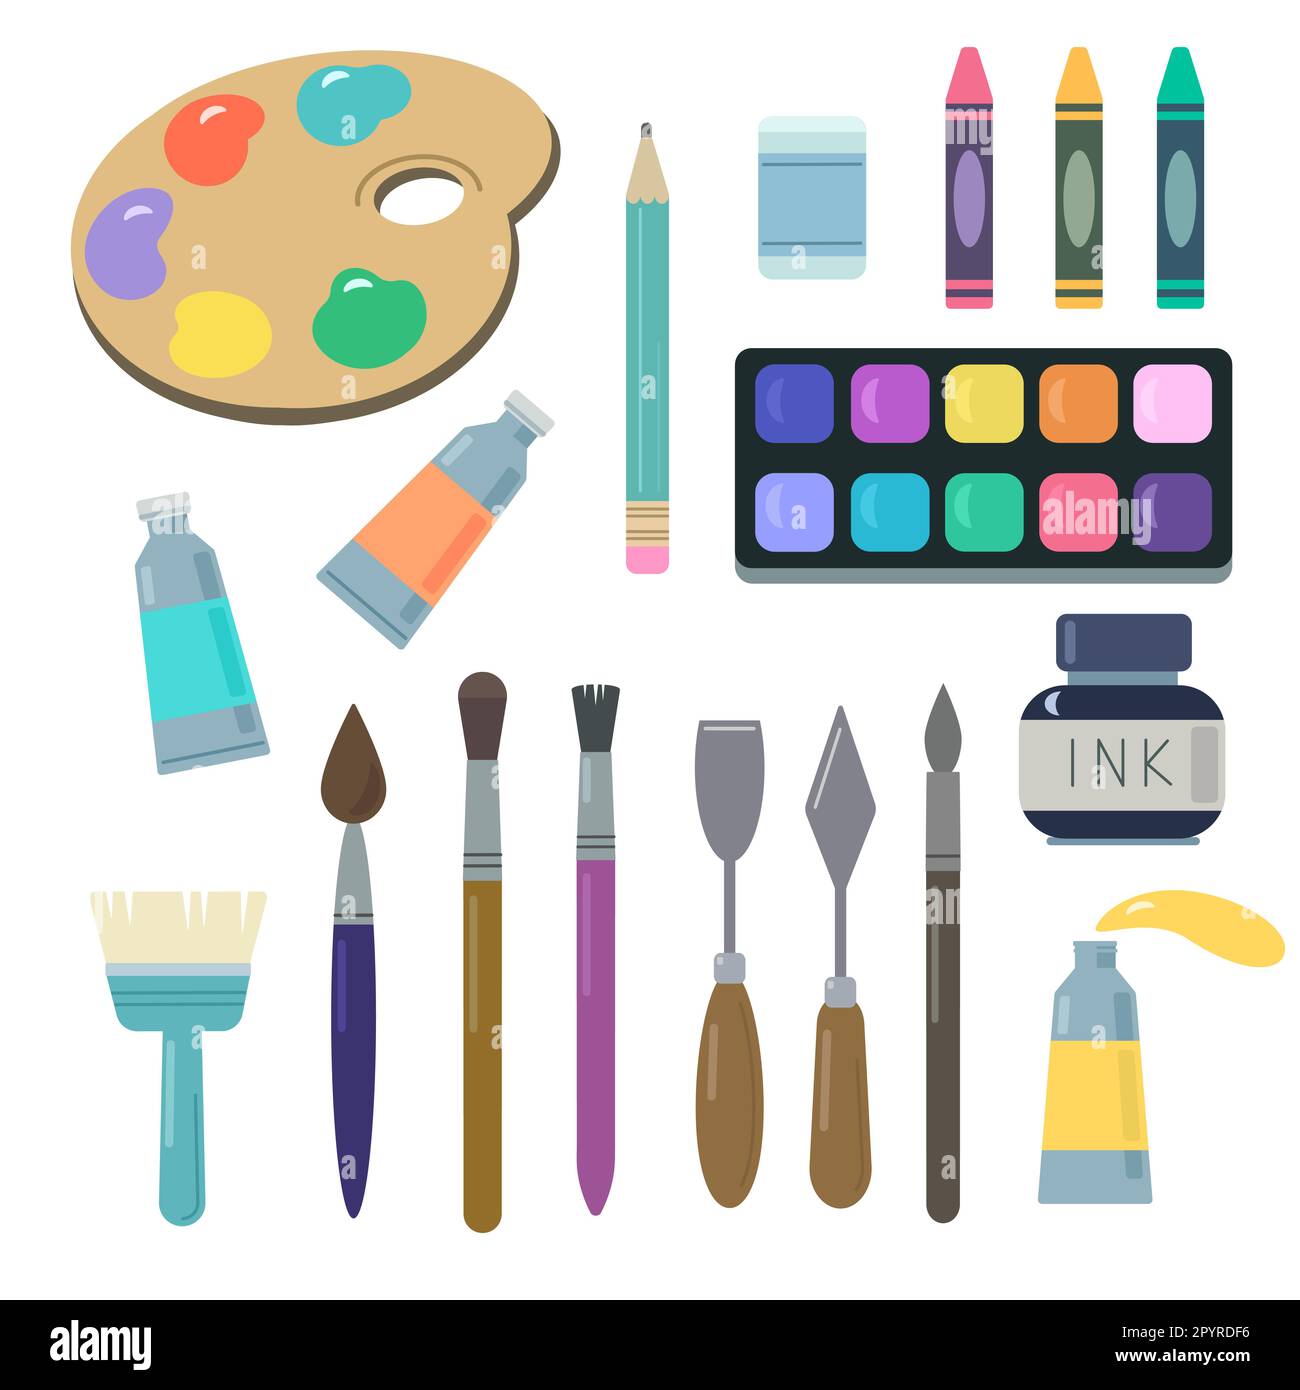 Artists supplies, paint tool vector illustration, watercolor paints, brushes, crayons and other draw materials isolated on white background. Stock Vector